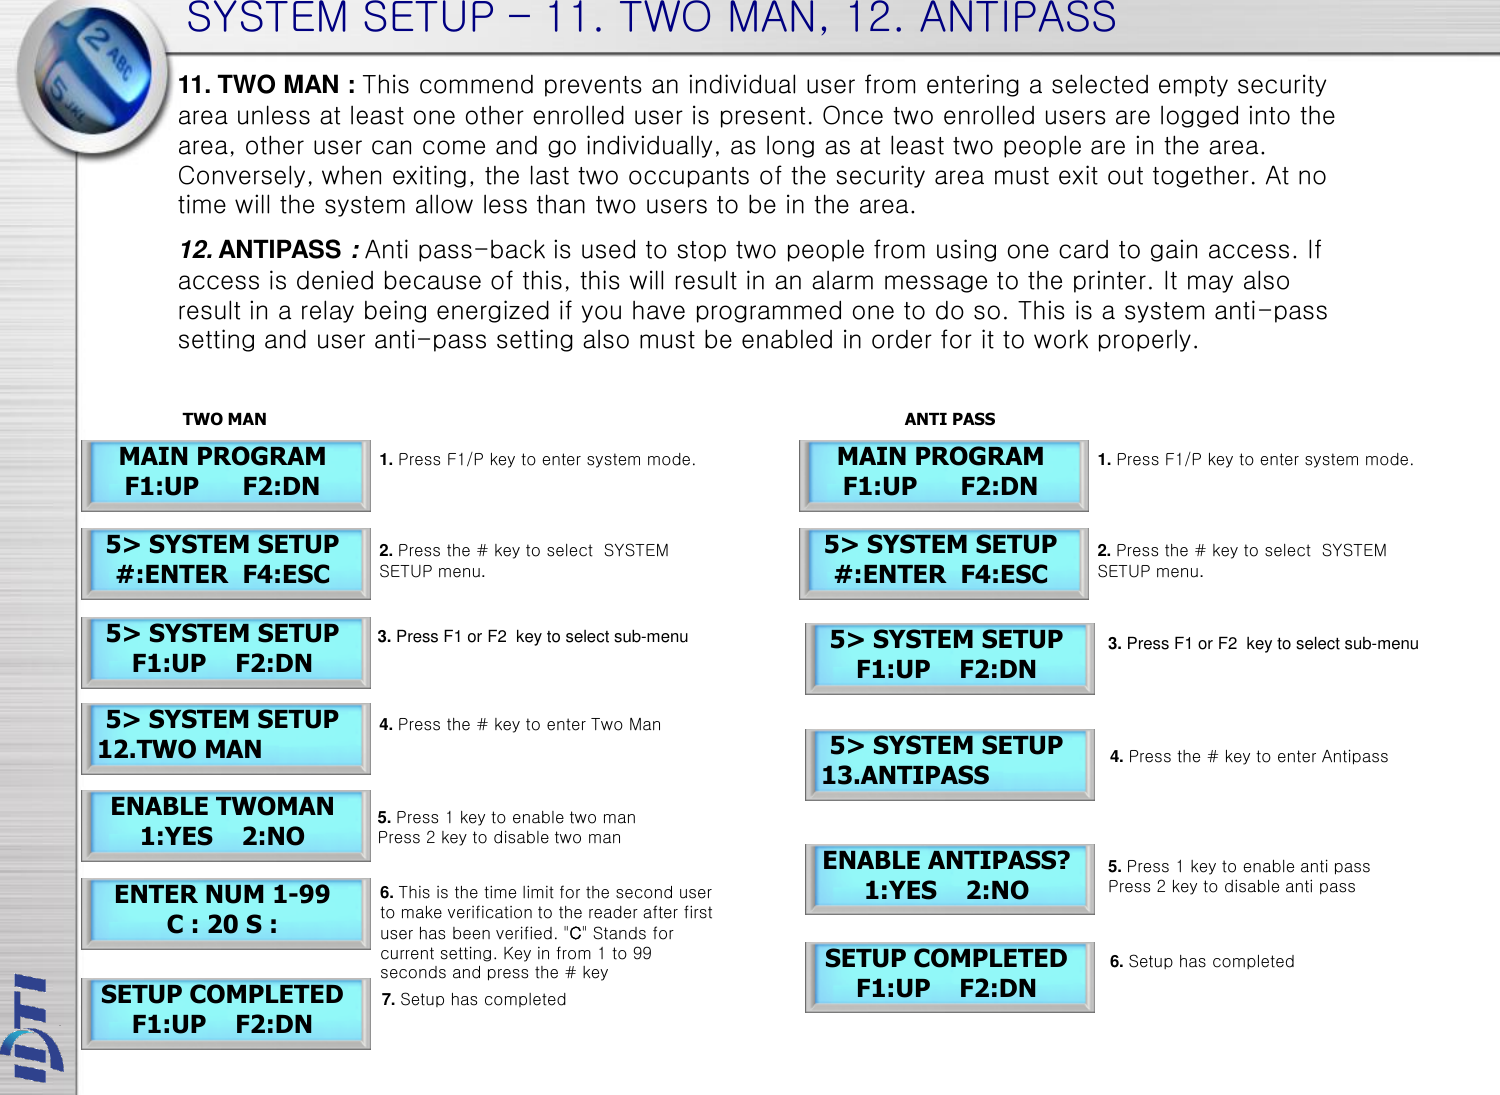 SYSTEM SETUP – 11. TWO MAN, 12. ANTIPASS 5&gt; SYSTEM SETUP  12.TWO MAN ENABLE TWOMAN 1:YES    2:NO ENTER NUM 1-99 C : 20 S : SETUP COMPLETED F1:UP    F2:DN 11. TWO MAN : This commend prevents an individual user from entering a selected empty security area unless at least one other enrolled user is present. Once two enrolled users are logged into the area, other user can come and go individually, as long as at least two people are in the area. Conversely, when exiting, the last two occupants of the security area must exit out together. At no time will the system allow less than two users to be in the area. 12. ANTIPASS : Anti pass-back is used to stop two people from using one card to gain access. If access is denied because of this, this will result in an alarm message to the printer. It may also result in a relay being energized if you have programmed one to do so. This is a system anti-pass setting and user anti-pass setting also must be enabled in order for it to work properly. 5&gt; SYSTEM SETUP  13.ANTIPASS ENABLE ANTIPASS? 1:YES    2:NO SETUP COMPLETED F1:UP    F2:DN 5&gt; SYSTEM SETUP F1:UP    F2:DN 1. Press F1/P key to enter system mode. 4. Press the # key to enter Two Man 3. Press F1 or F2  key to select sub-menu 6. This is the time limit for the second user to make verification to the reader after first user has been verified. &quot;C&quot; Stands for current setting. Key in from 1 to 99 seconds and press the # key 5&gt; SYSTEM SETUP #:ENTER  F4:ESC 2. Press the # key to select  SYSTEM SETUP menu. 5&gt; SYSTEM SETUP F1:UP    F2:DN MAIN PROGRAM F1:UP      F2:DN 5. Press 1 key to enable two man Press 2 key to disable two man 7. Setup has completed 4. Press the # key to enter Antipass 3. Press F1 or F2  key to select sub-menu 5. Press 1 key to enable anti pass Press 2 key to disable anti pass 6. Setup has completed 1. Press F1/P key to enter system mode. 5&gt; SYSTEM SETUP #:ENTER  F4:ESC 2. Press the # key to select  SYSTEM SETUP menu. MAIN PROGRAM F1:UP      F2:DN TWO MAN ANTI PASS 